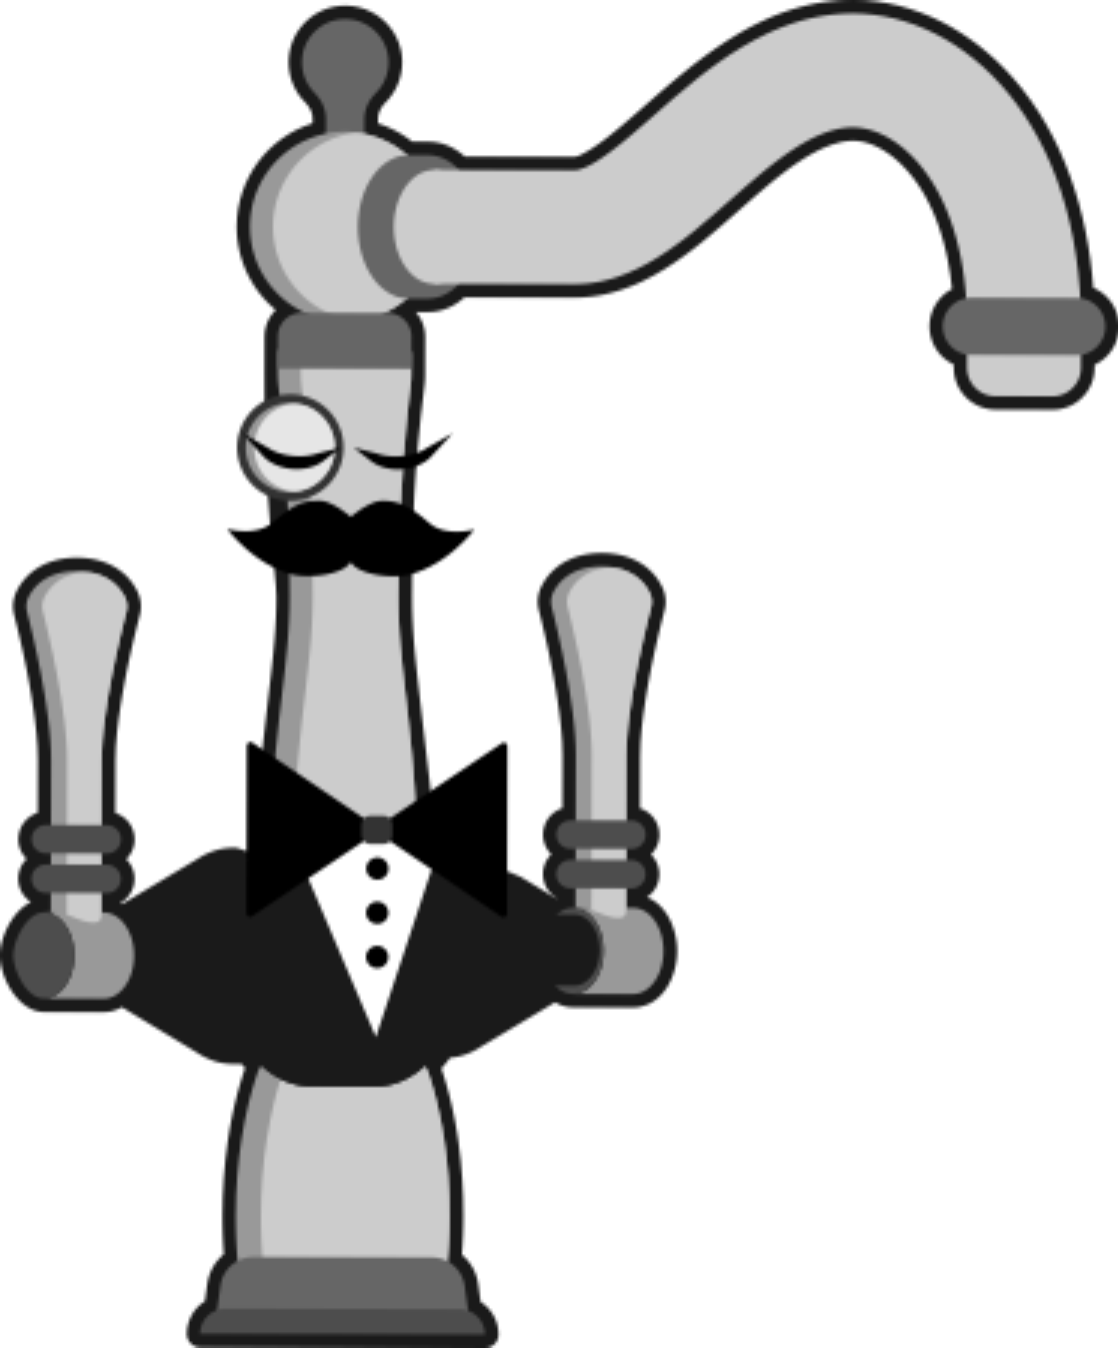 ALLWAYS_PLUMBING_BUTLER_ICON_WITHOUT_BACKGROUND_100dpi.png